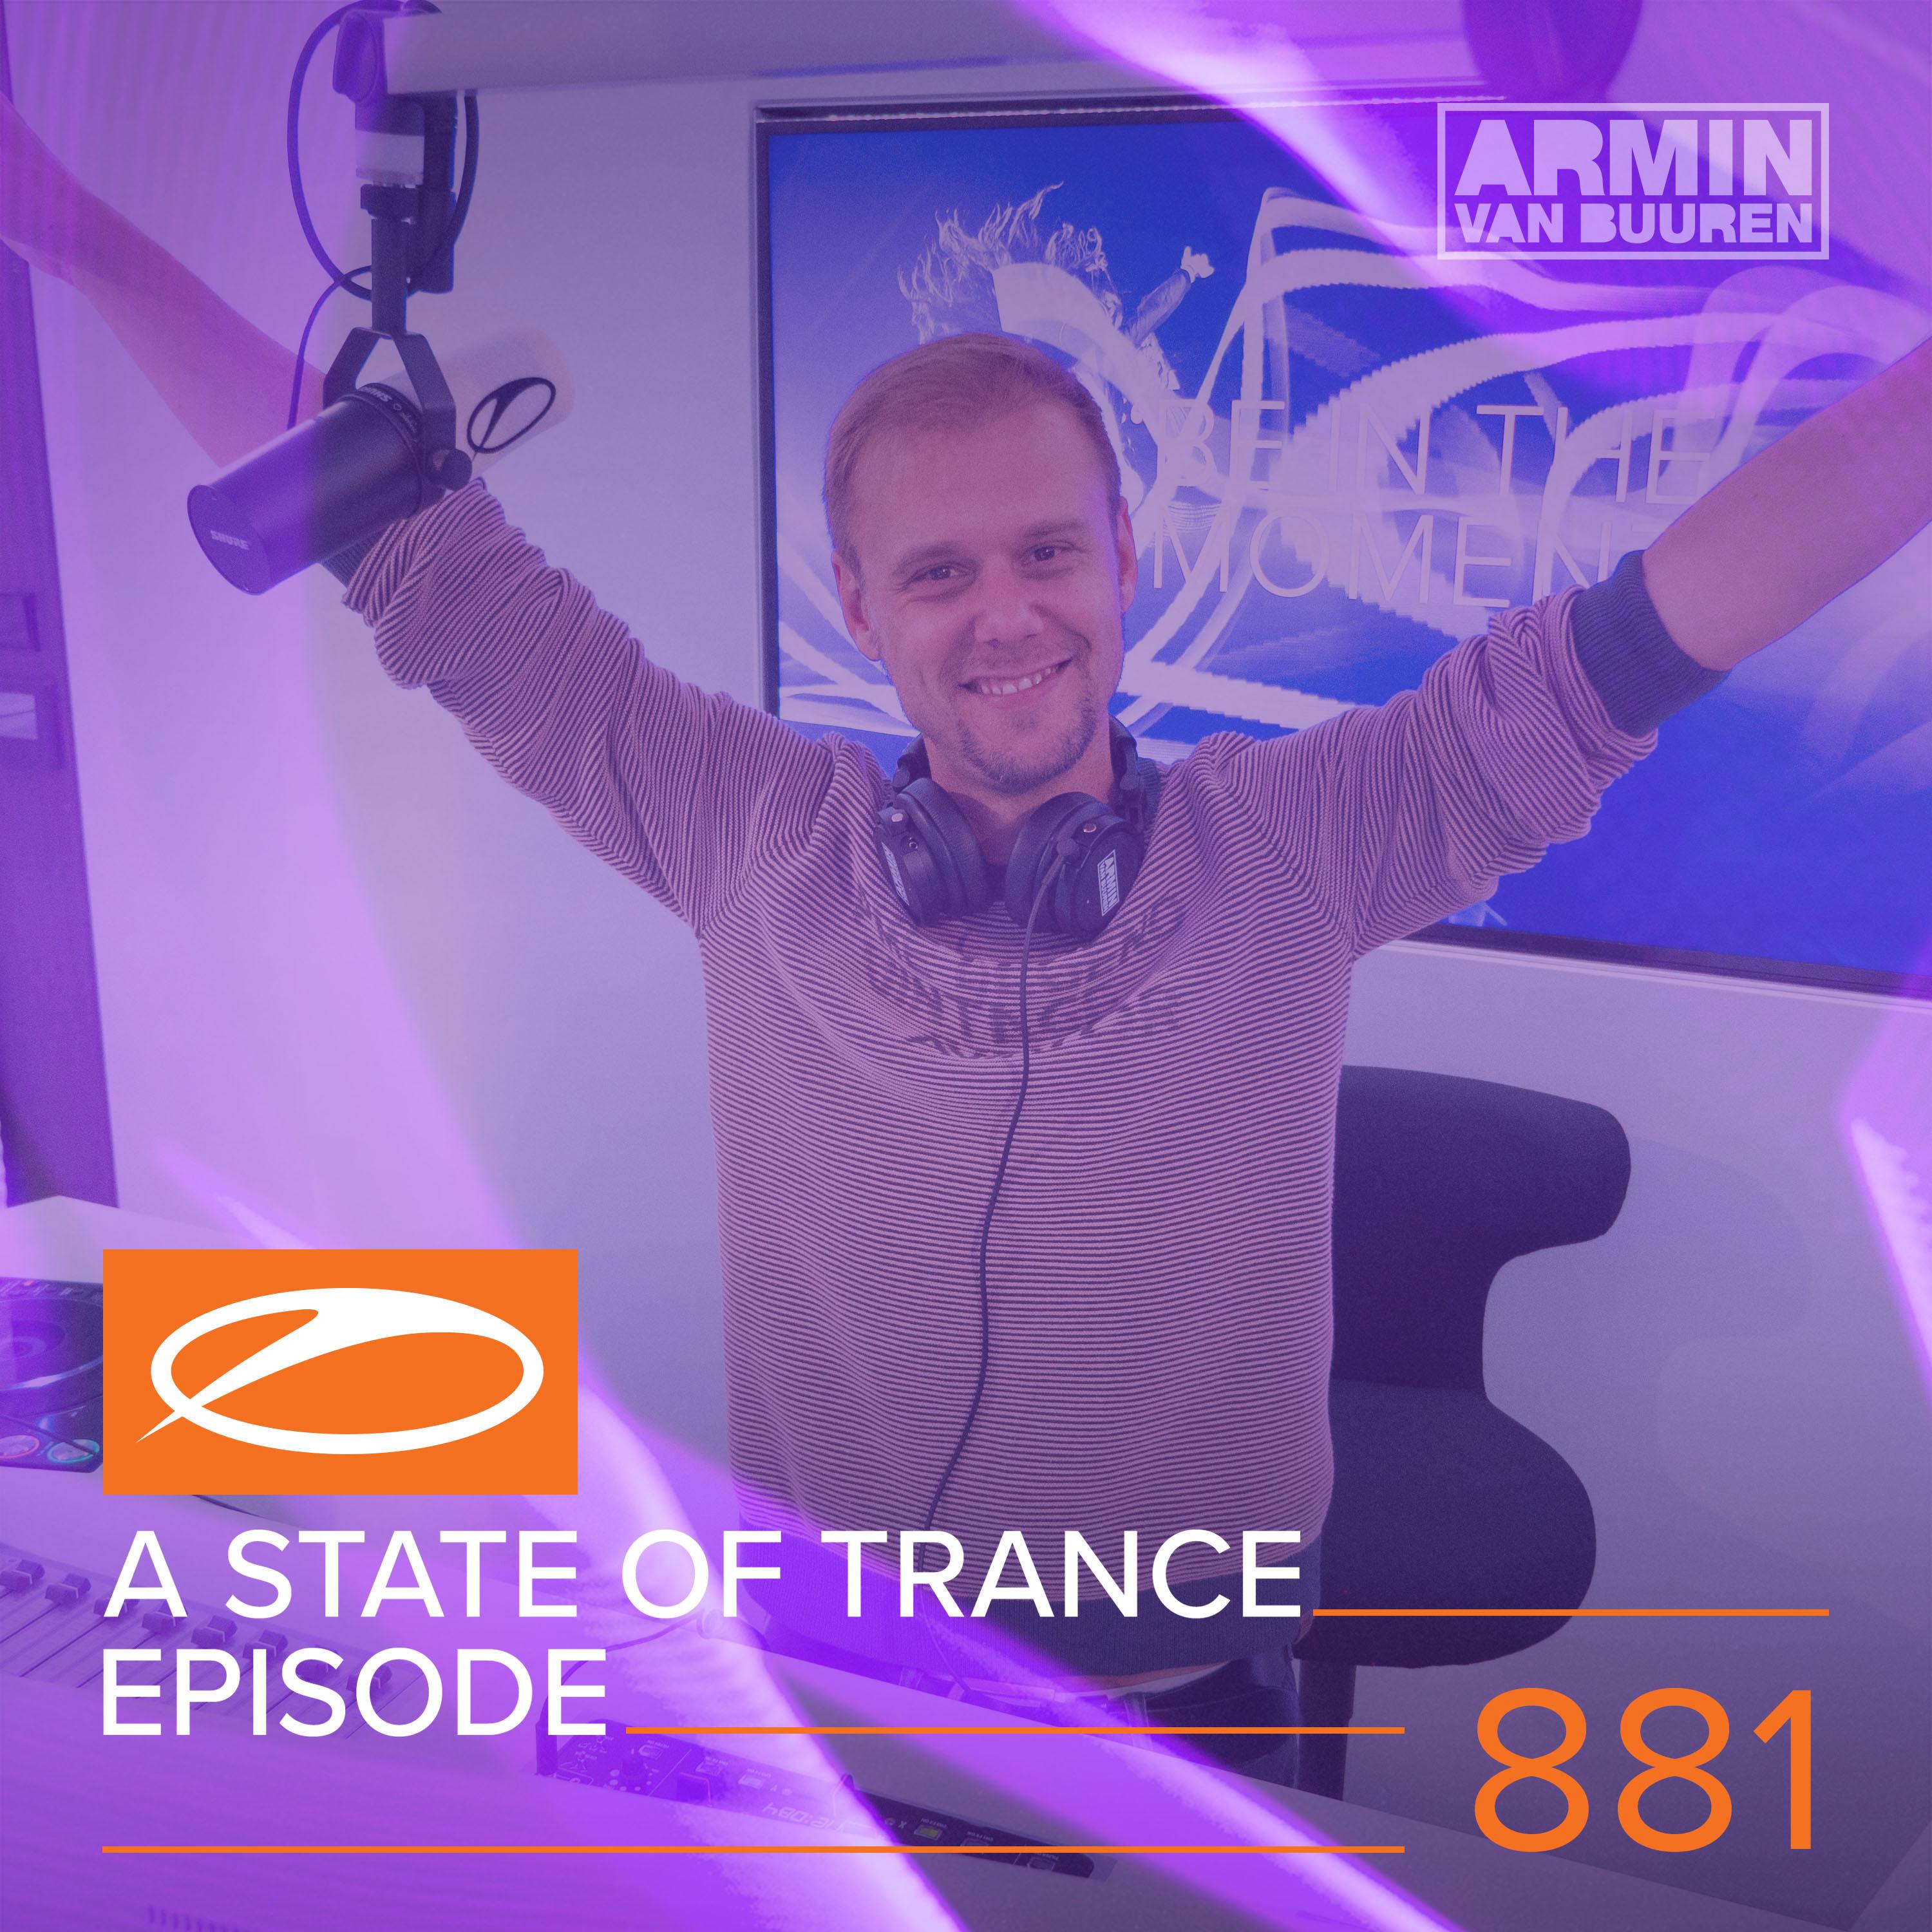 From Here To Eternity 2018 (ASOT 881)